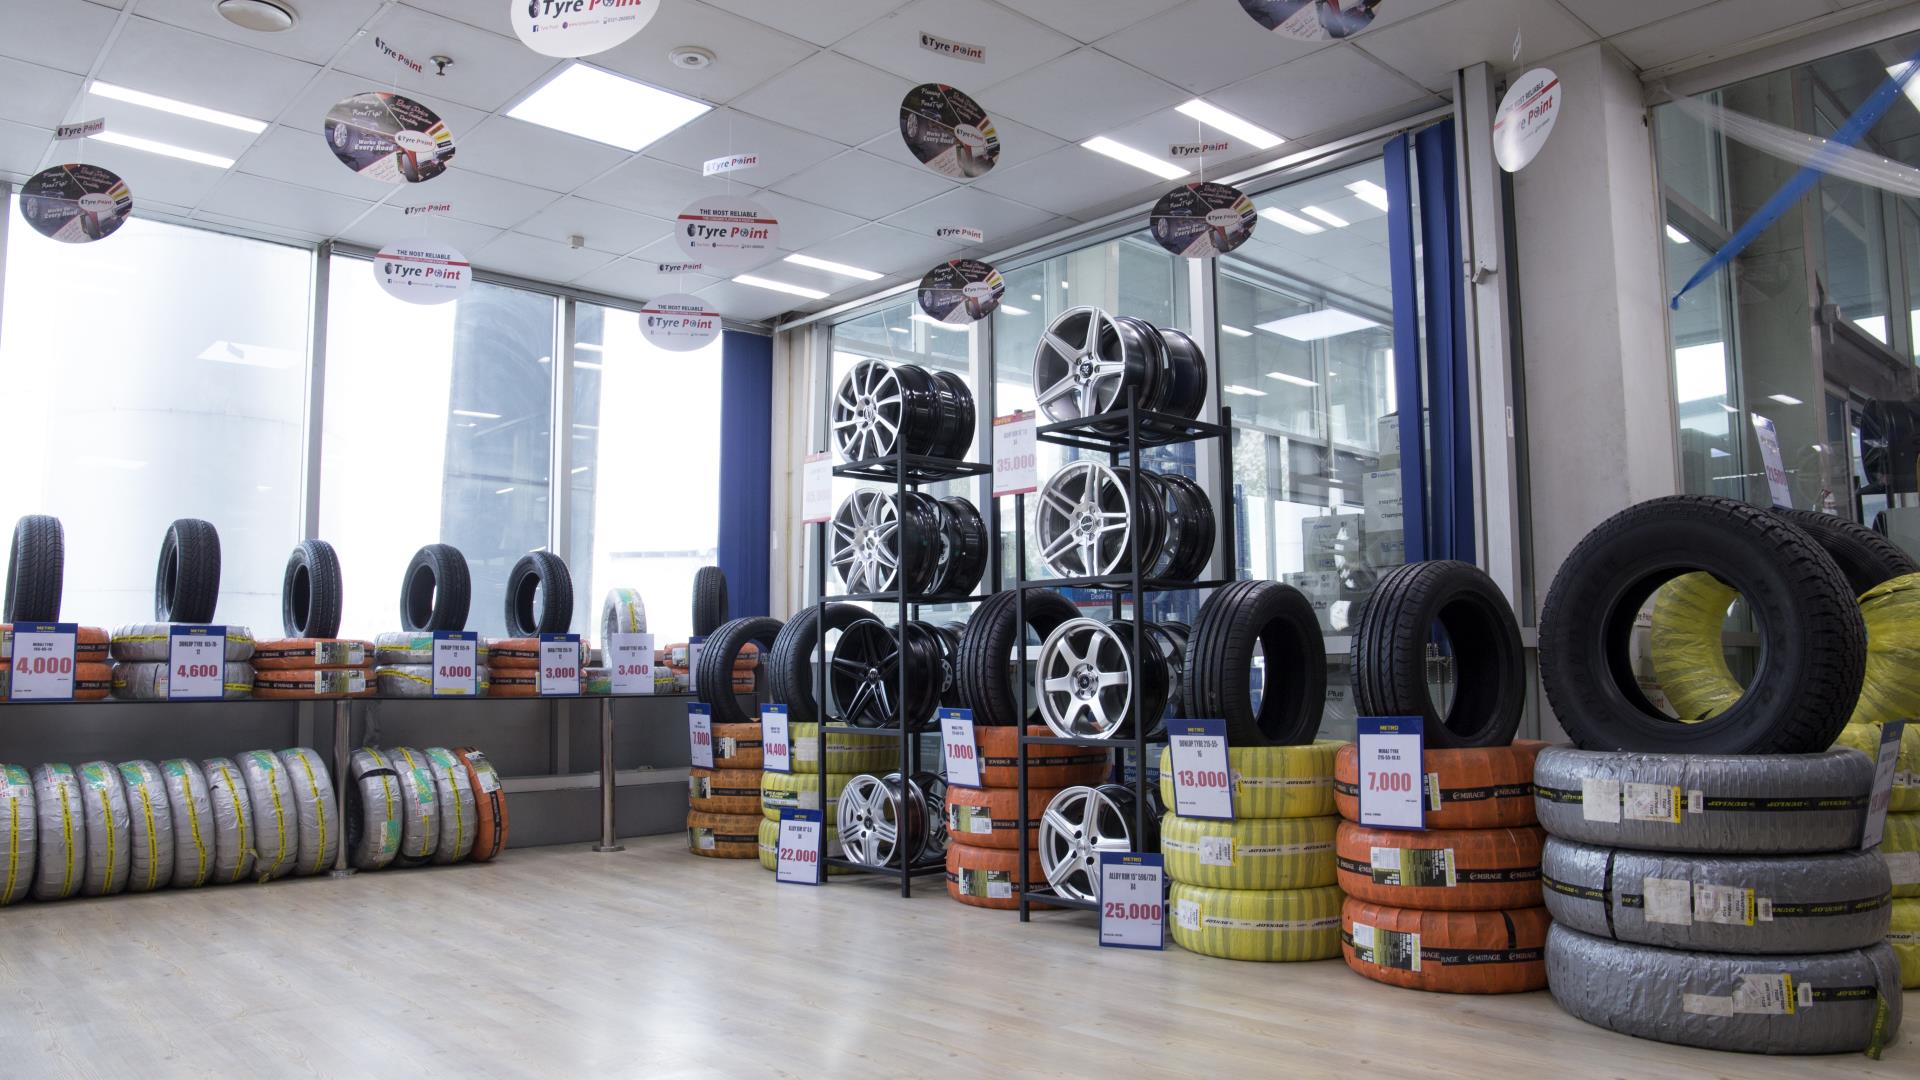 Tire repairs: What types are possible and can the tire shop perform them?